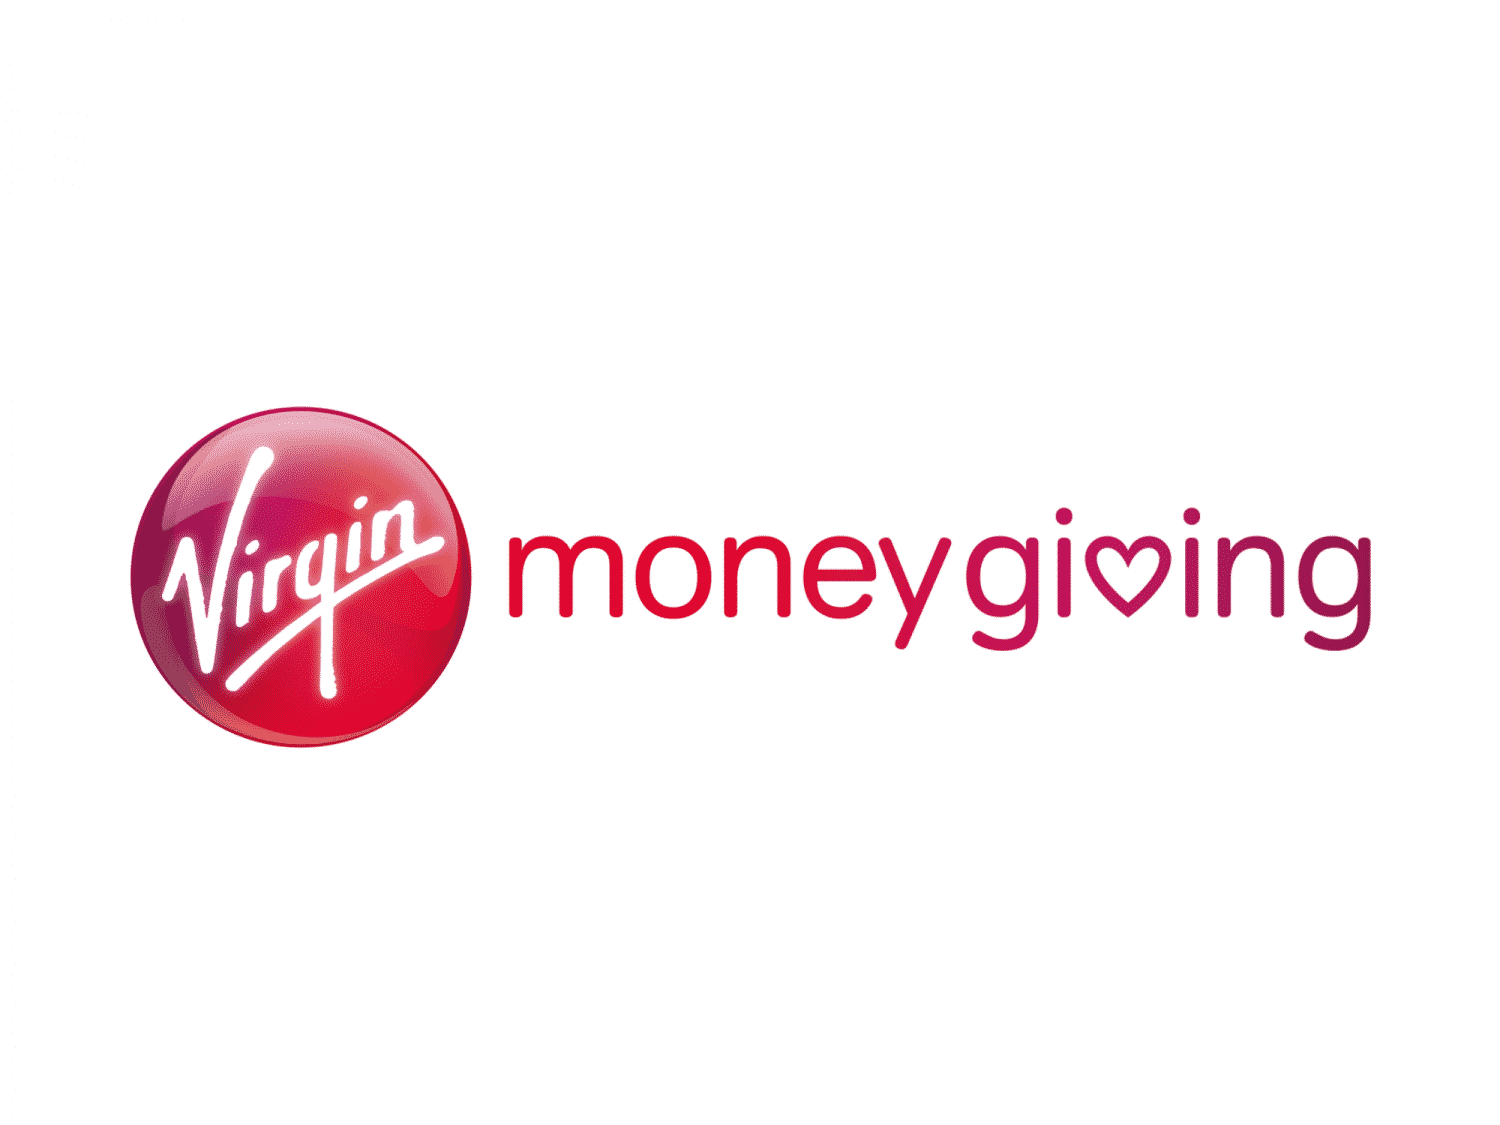 We are LIVE on Virgin Money Giving